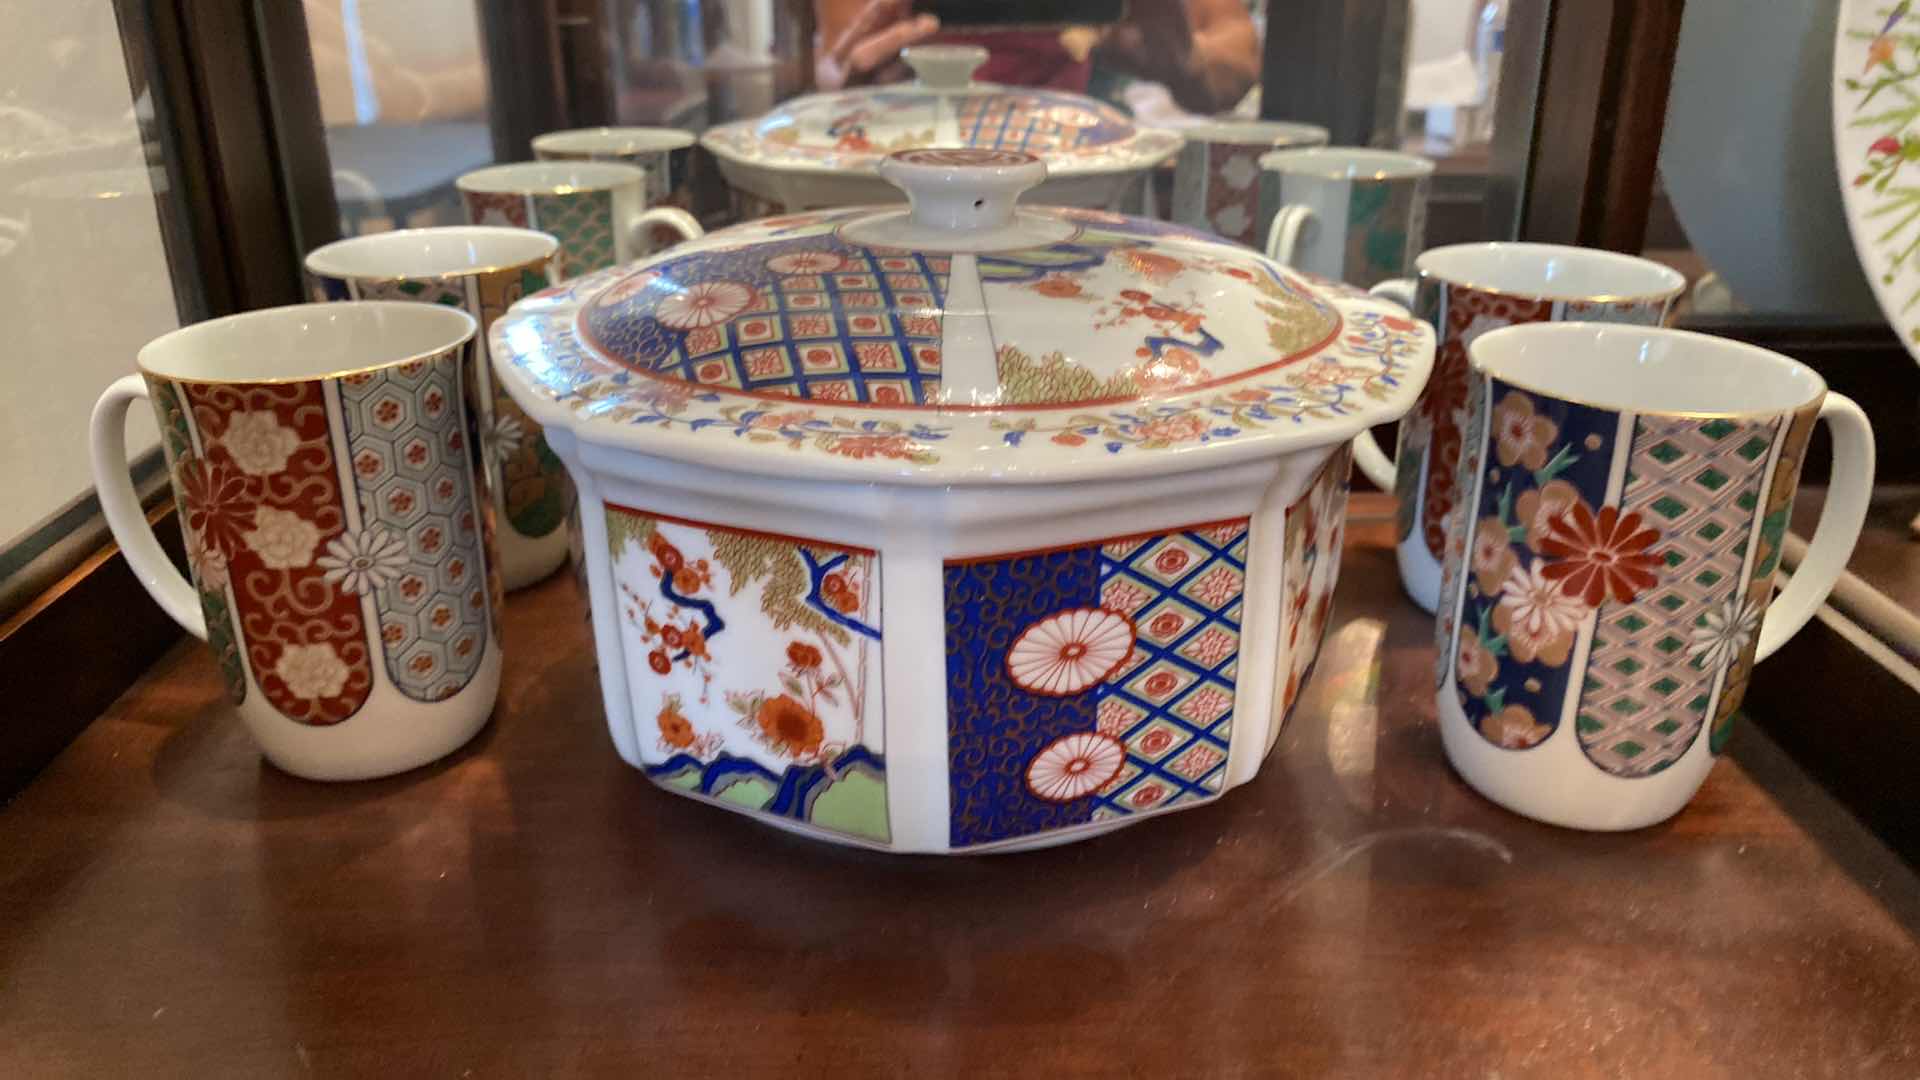 Photo 2 of CHINESE IMARI STYLE COVERED PORCELAIN DISH AND 4 CUPS FROM GUMPS